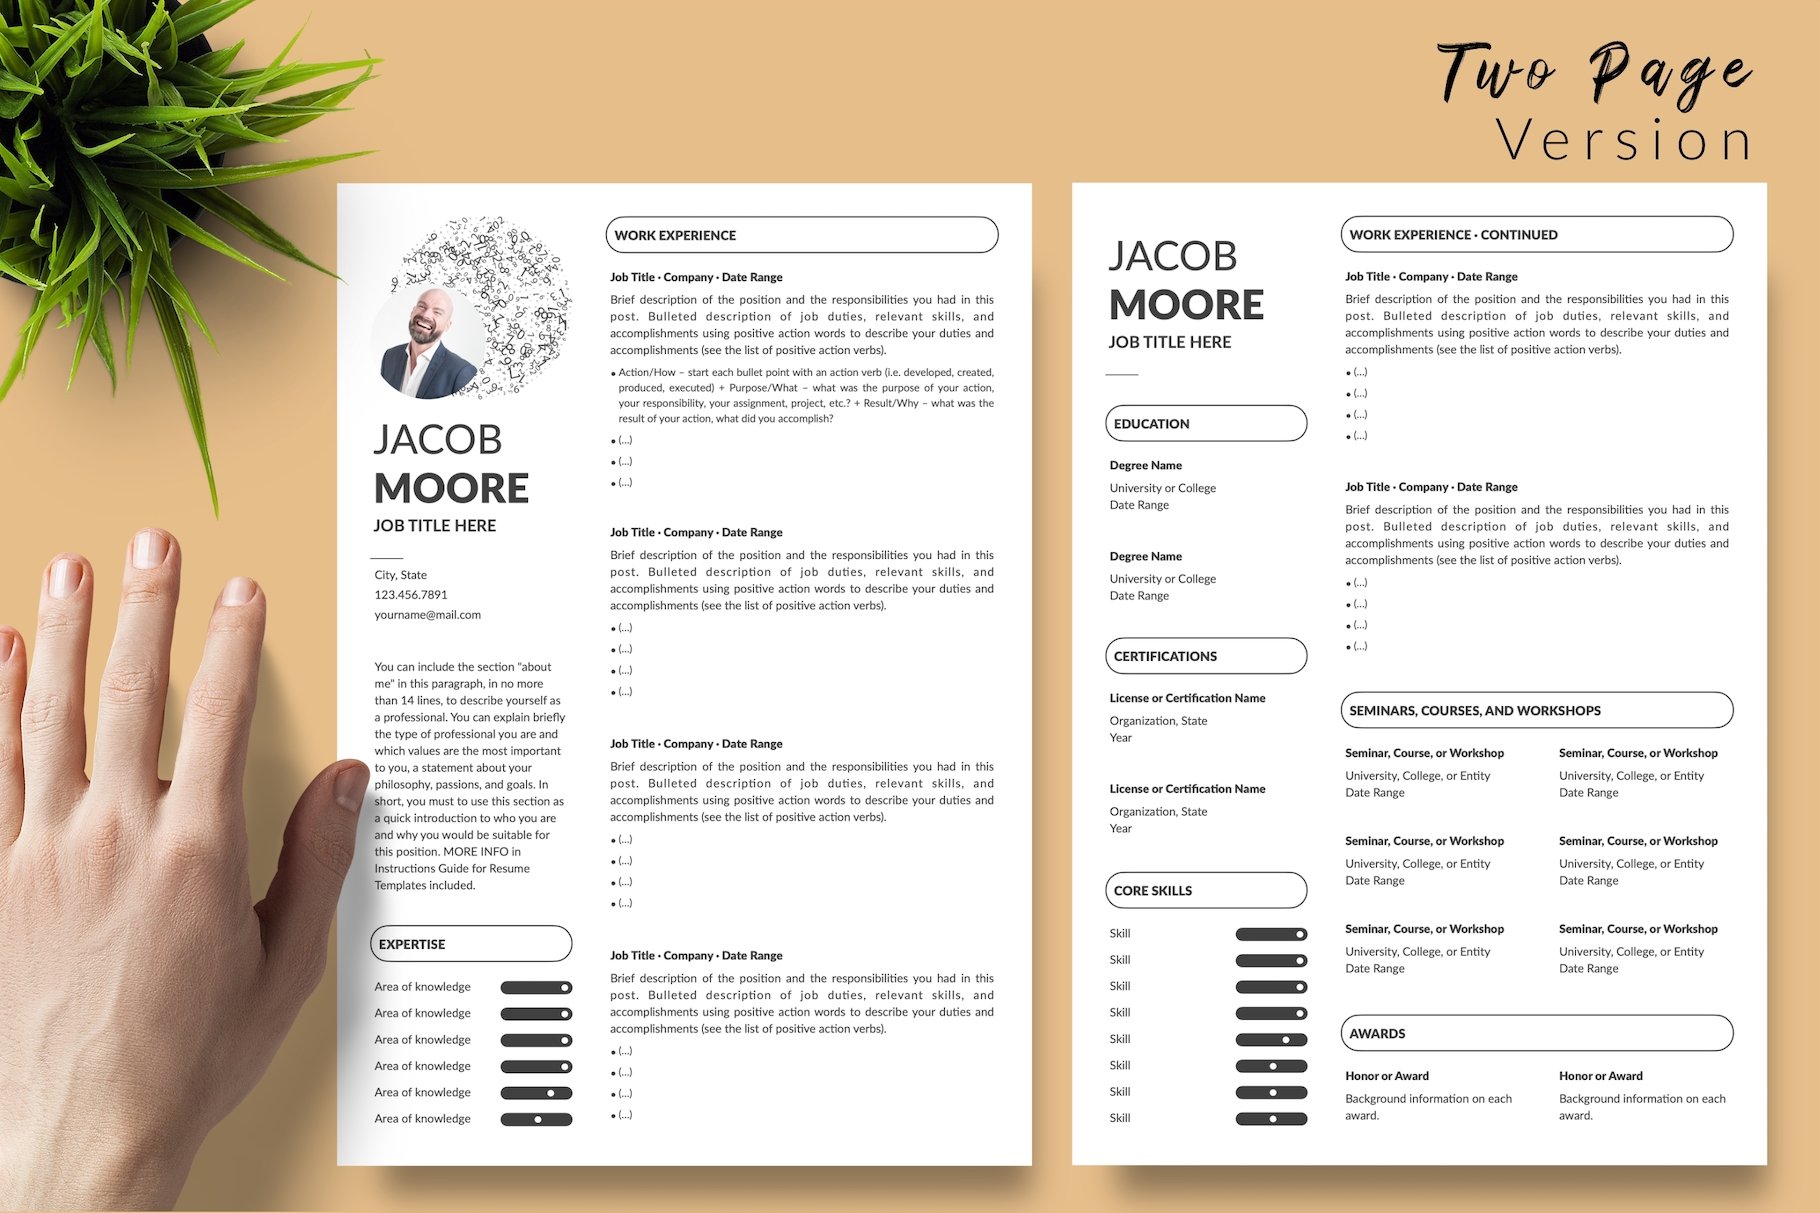 resume cv template jacob moore 282in1 special edition29 for creative market 03 two page version white edition 480